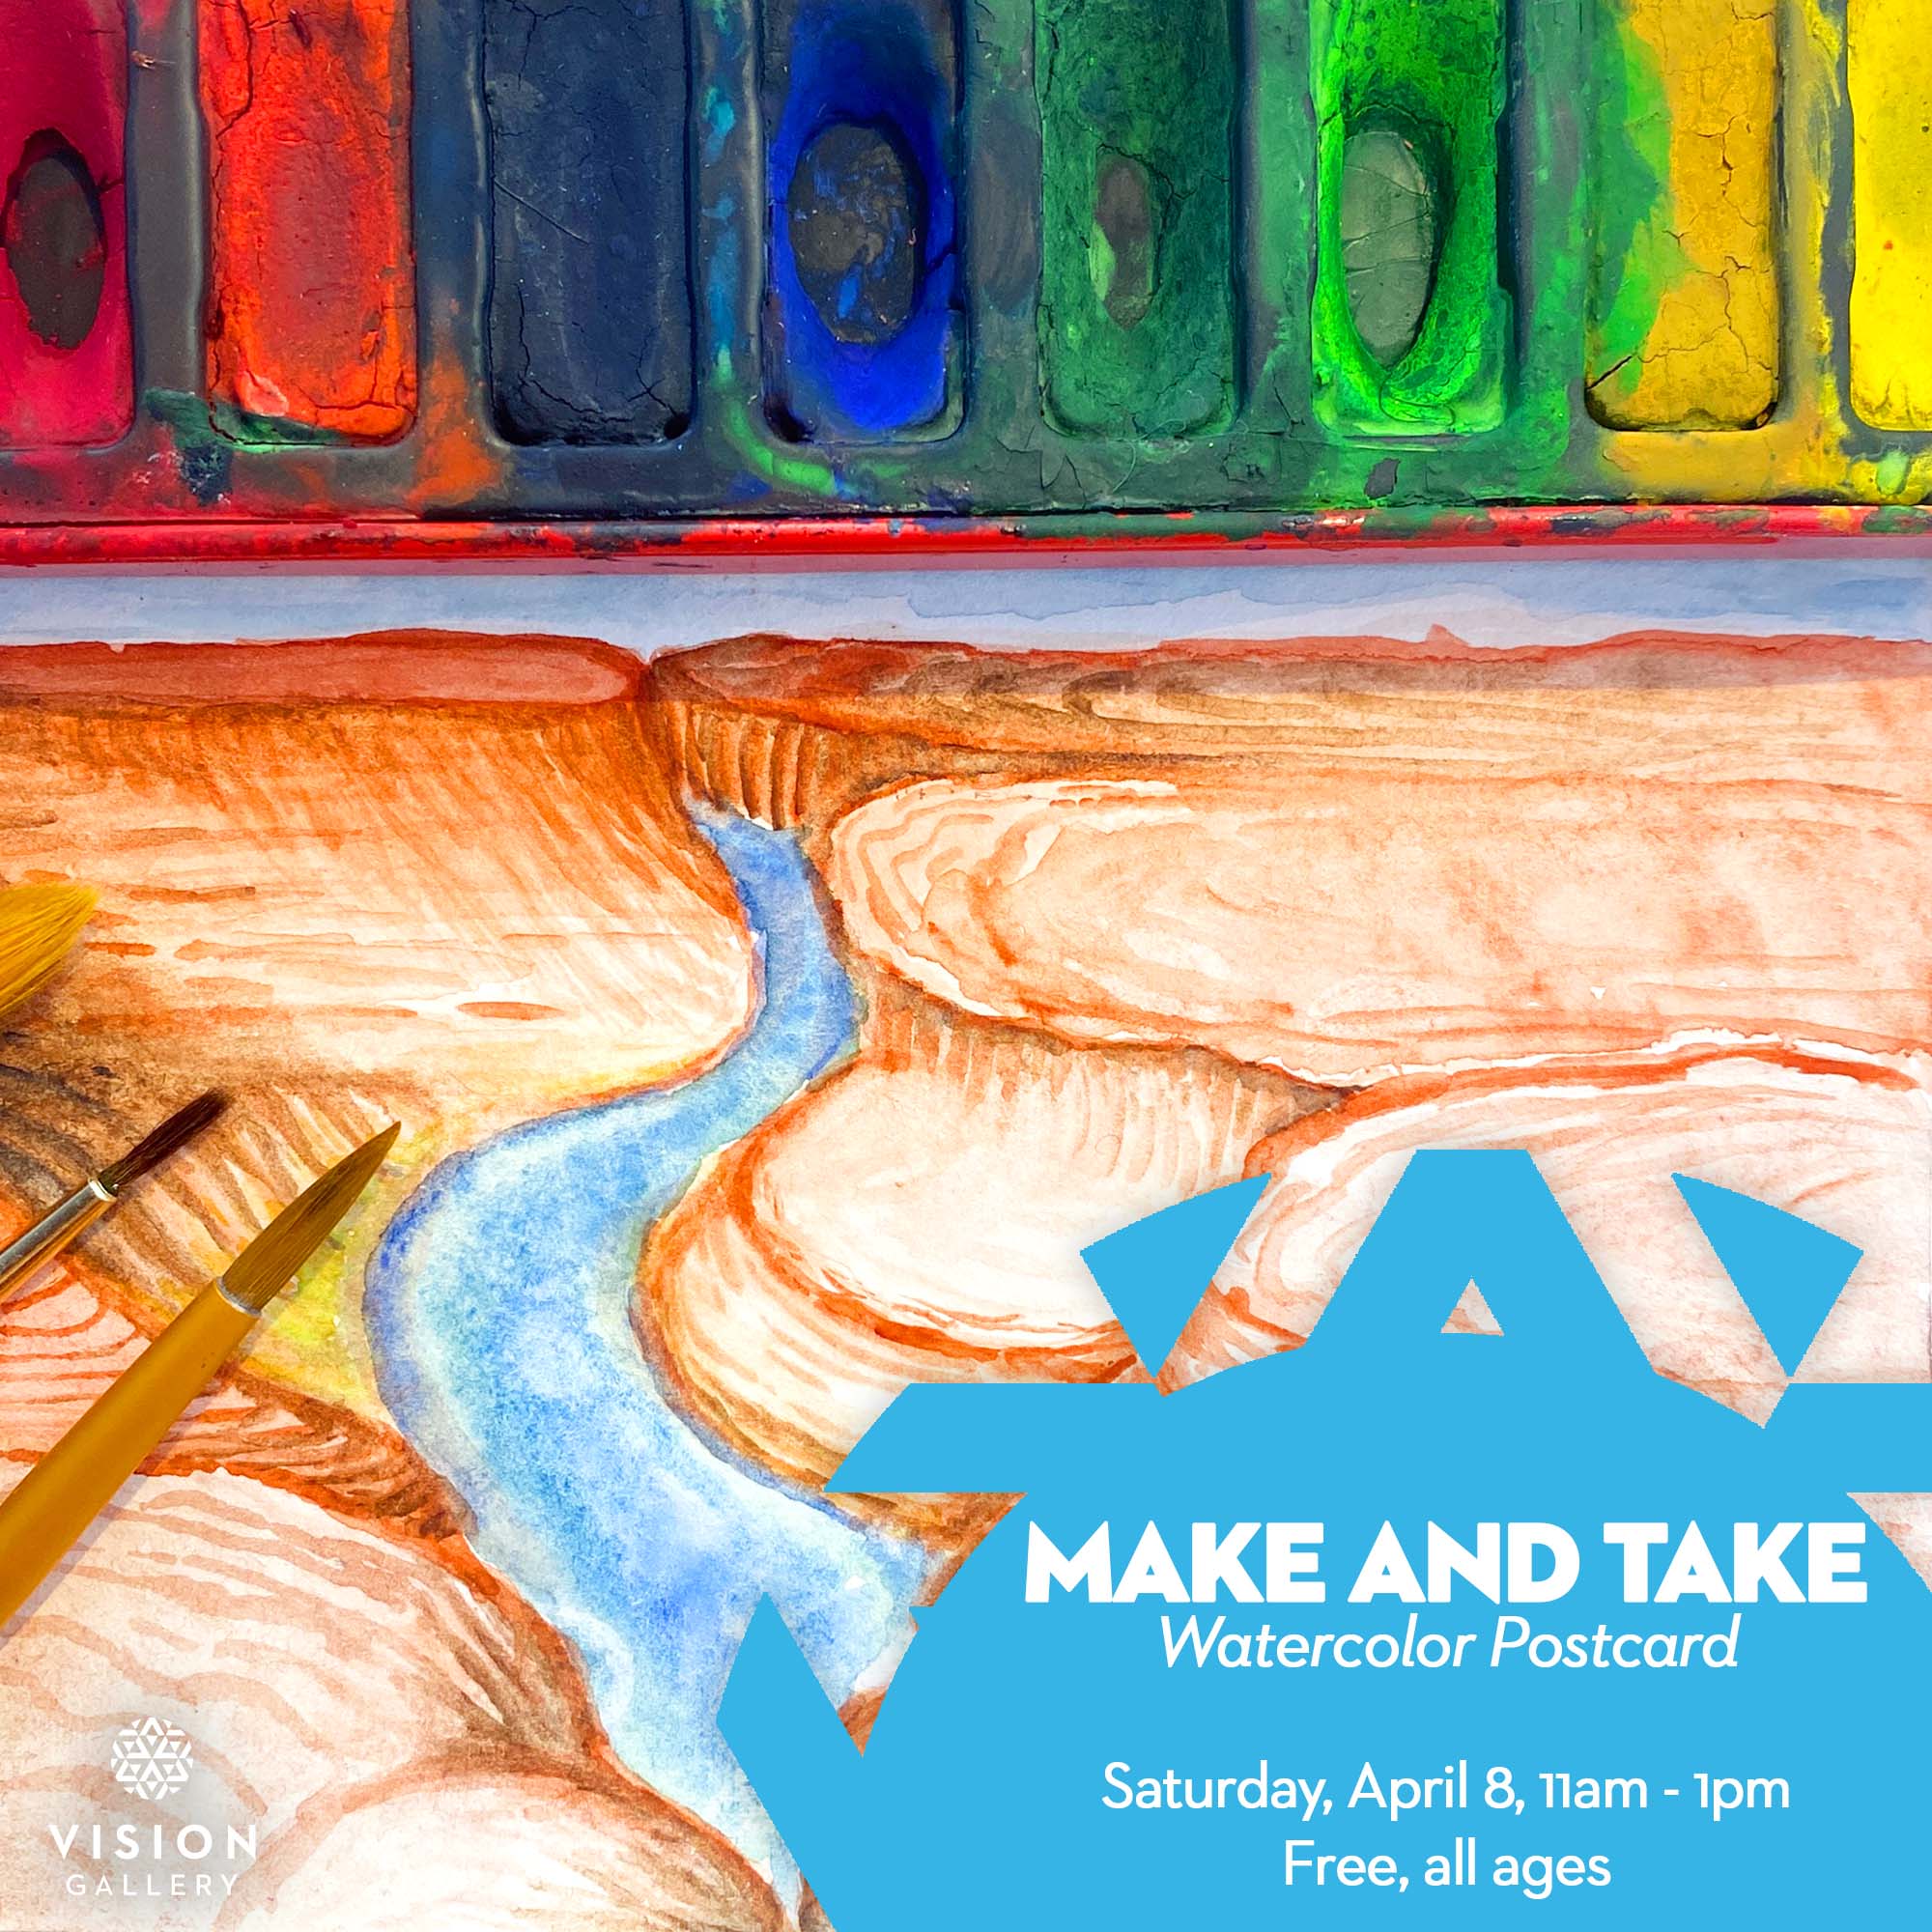 Take and Make: Postcards, Events